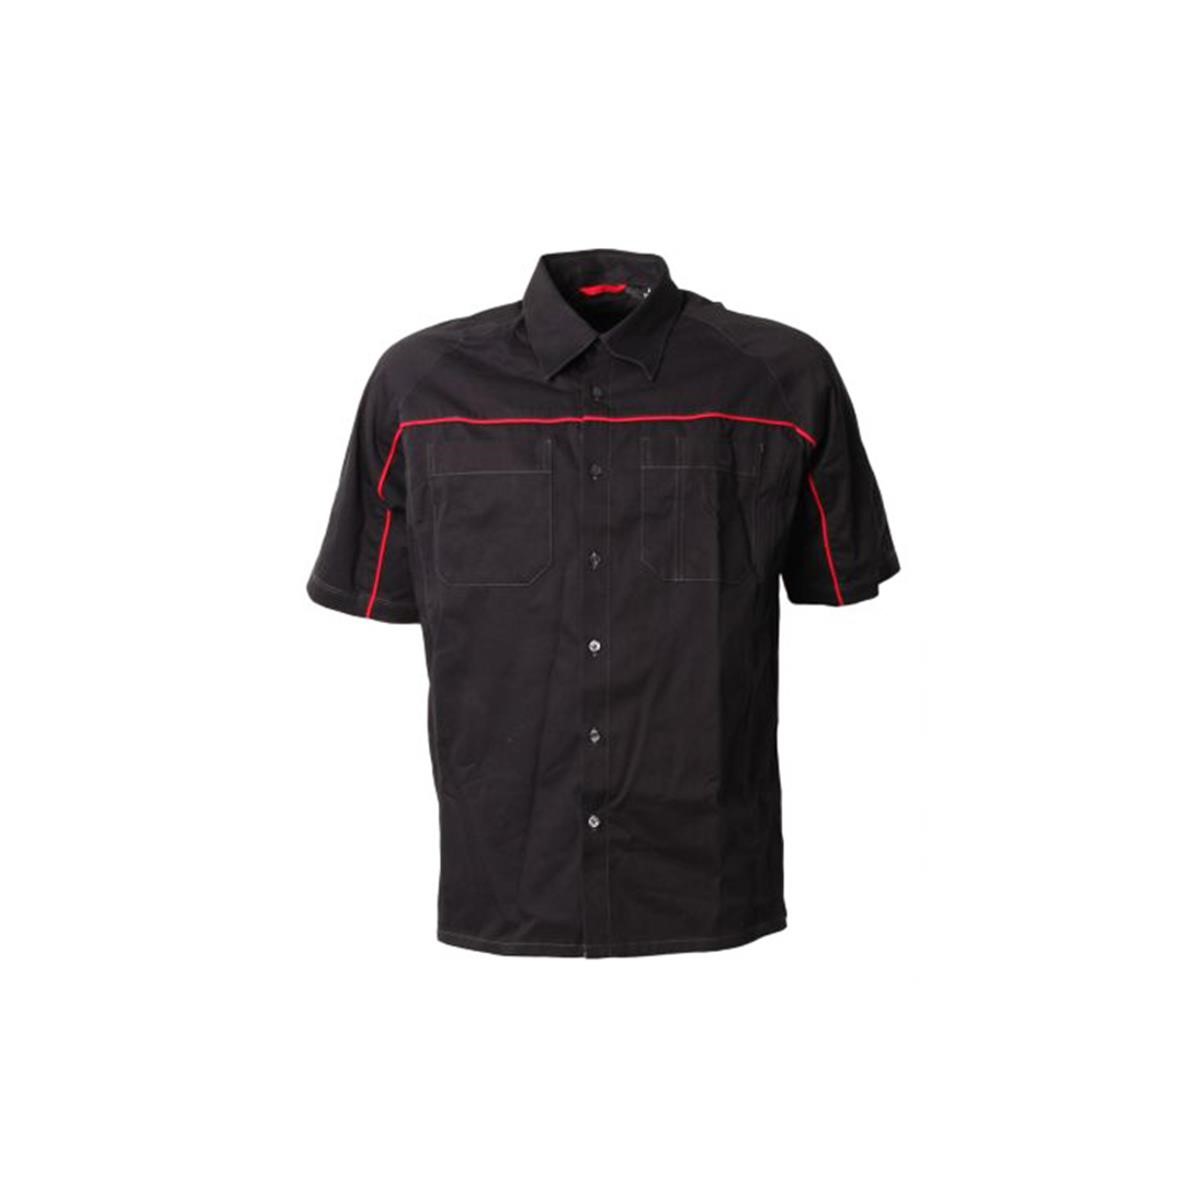 O'Neal Chemise Manches Courtes Worker Black